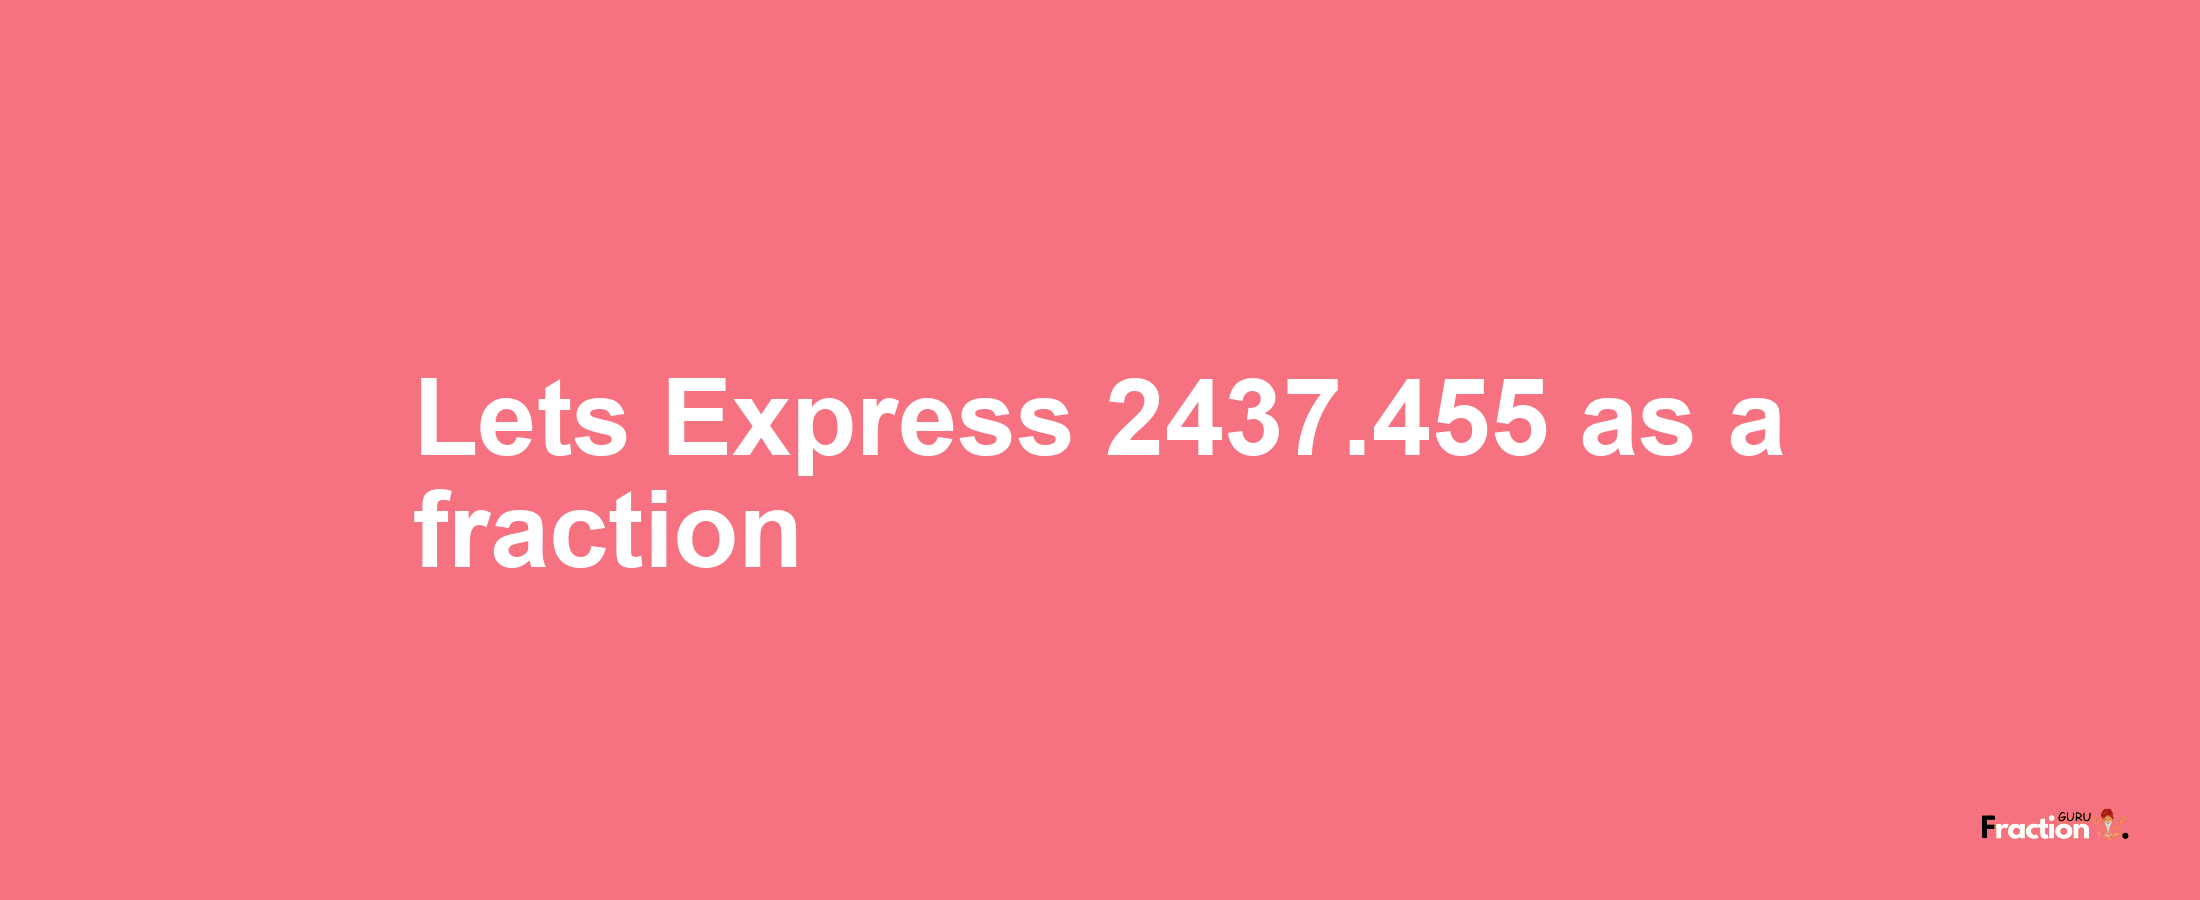 Lets Express 2437.455 as afraction